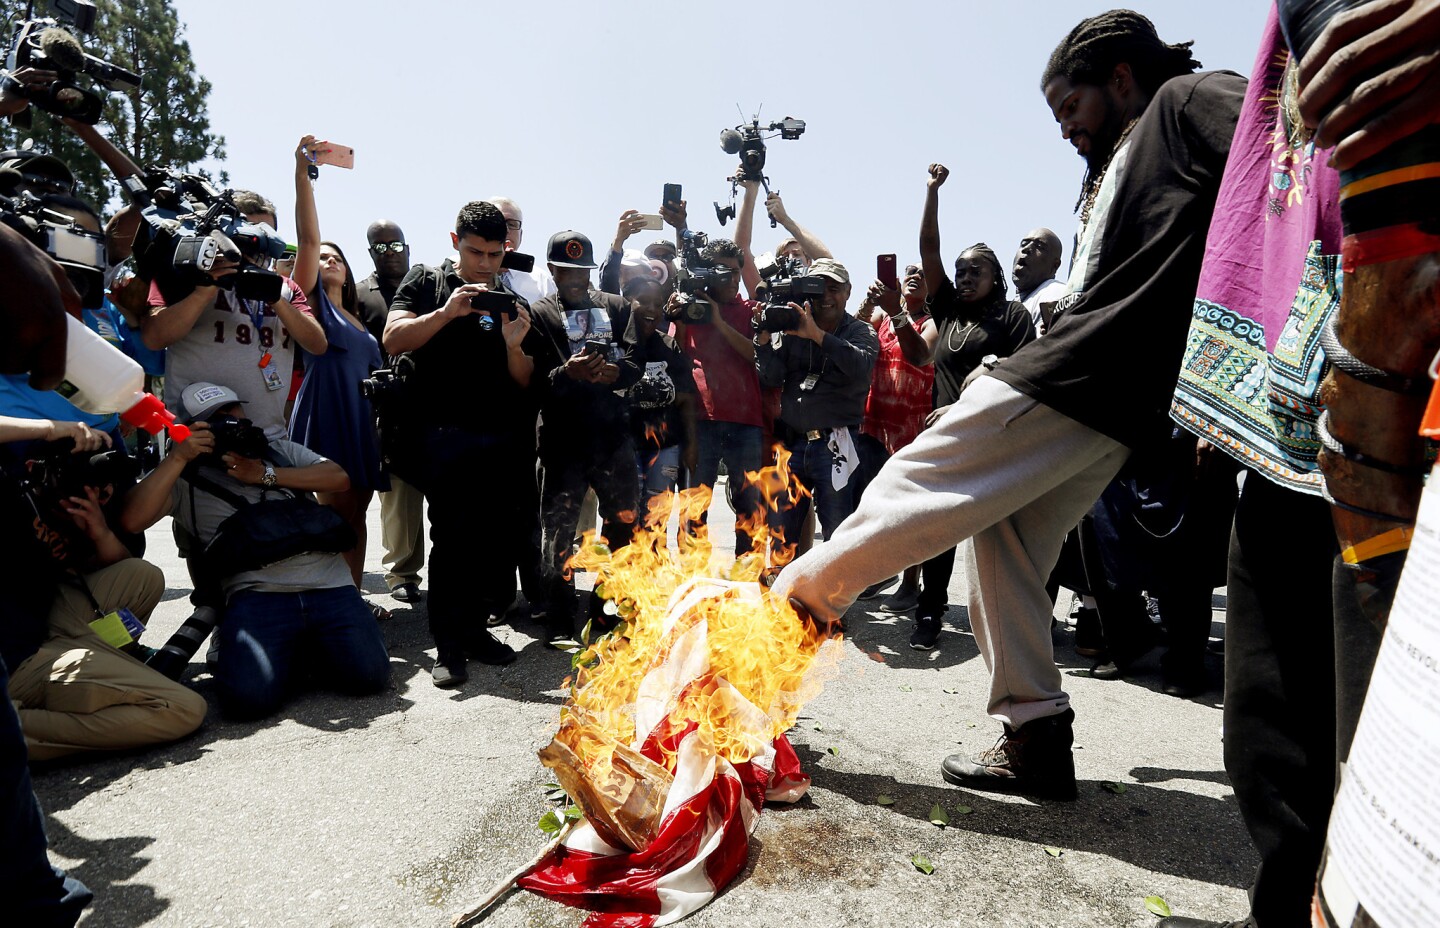 Counterprotesters burn an American flag outside the South L.A. office of Rep. Maxine Waters on Thursday. They gathered after hearing that the Oath Keepers were planning to demonstrate at the site, but the far-right anti-government group was a no-show.